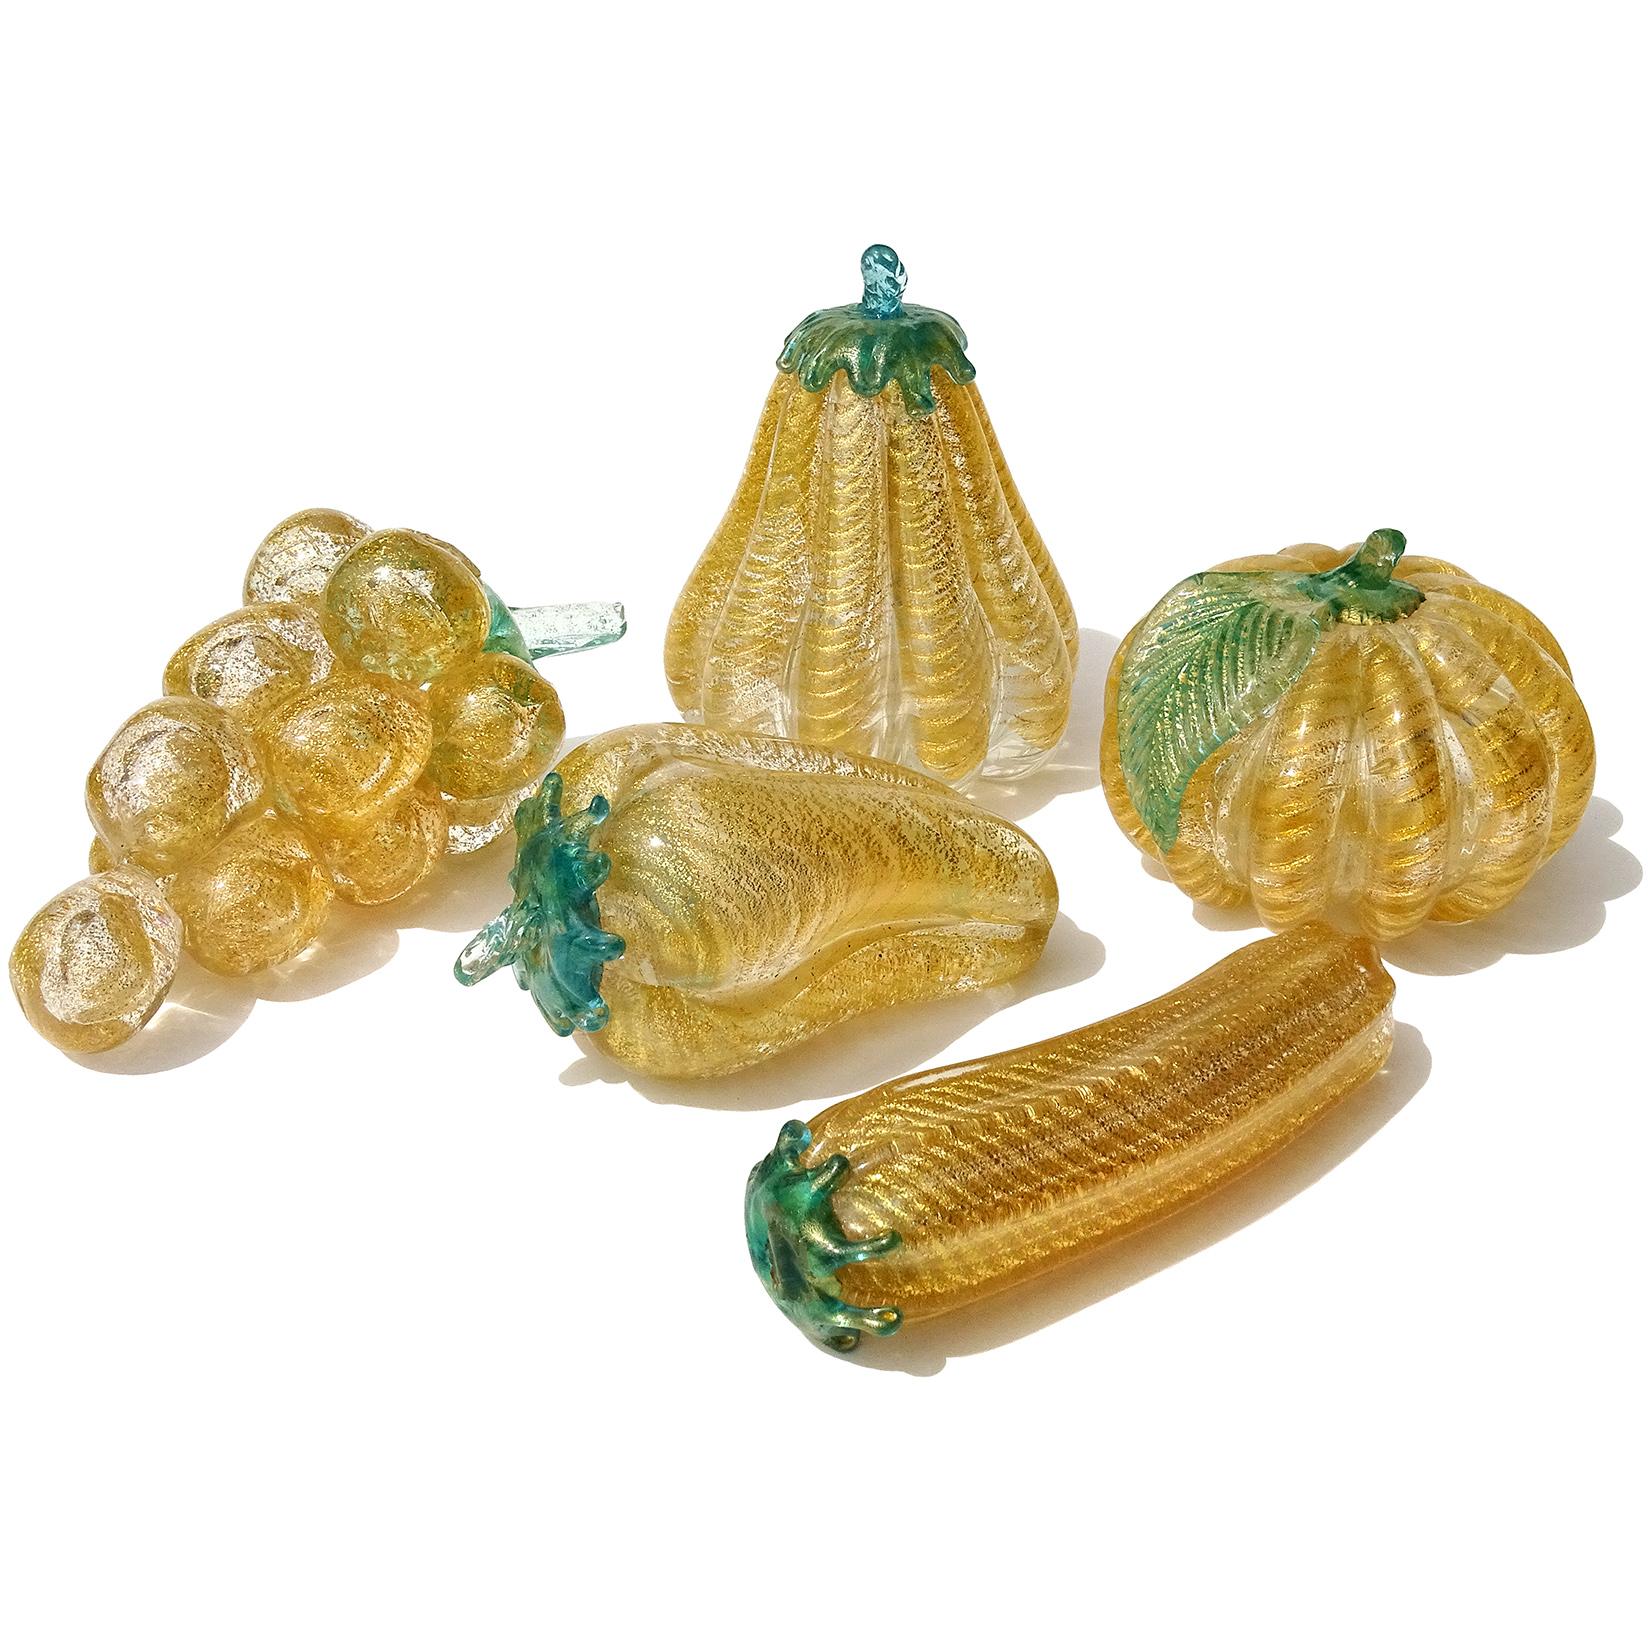 Gorgeous set of vintage Murano hand blown gold flecks Italian art glass vegetables and fruit sculptures. Attributed to the Barovier e Toso Company. There is a large grape bunch, a zucchini, a pepper, and 2 different gourd shapes. Each piece is